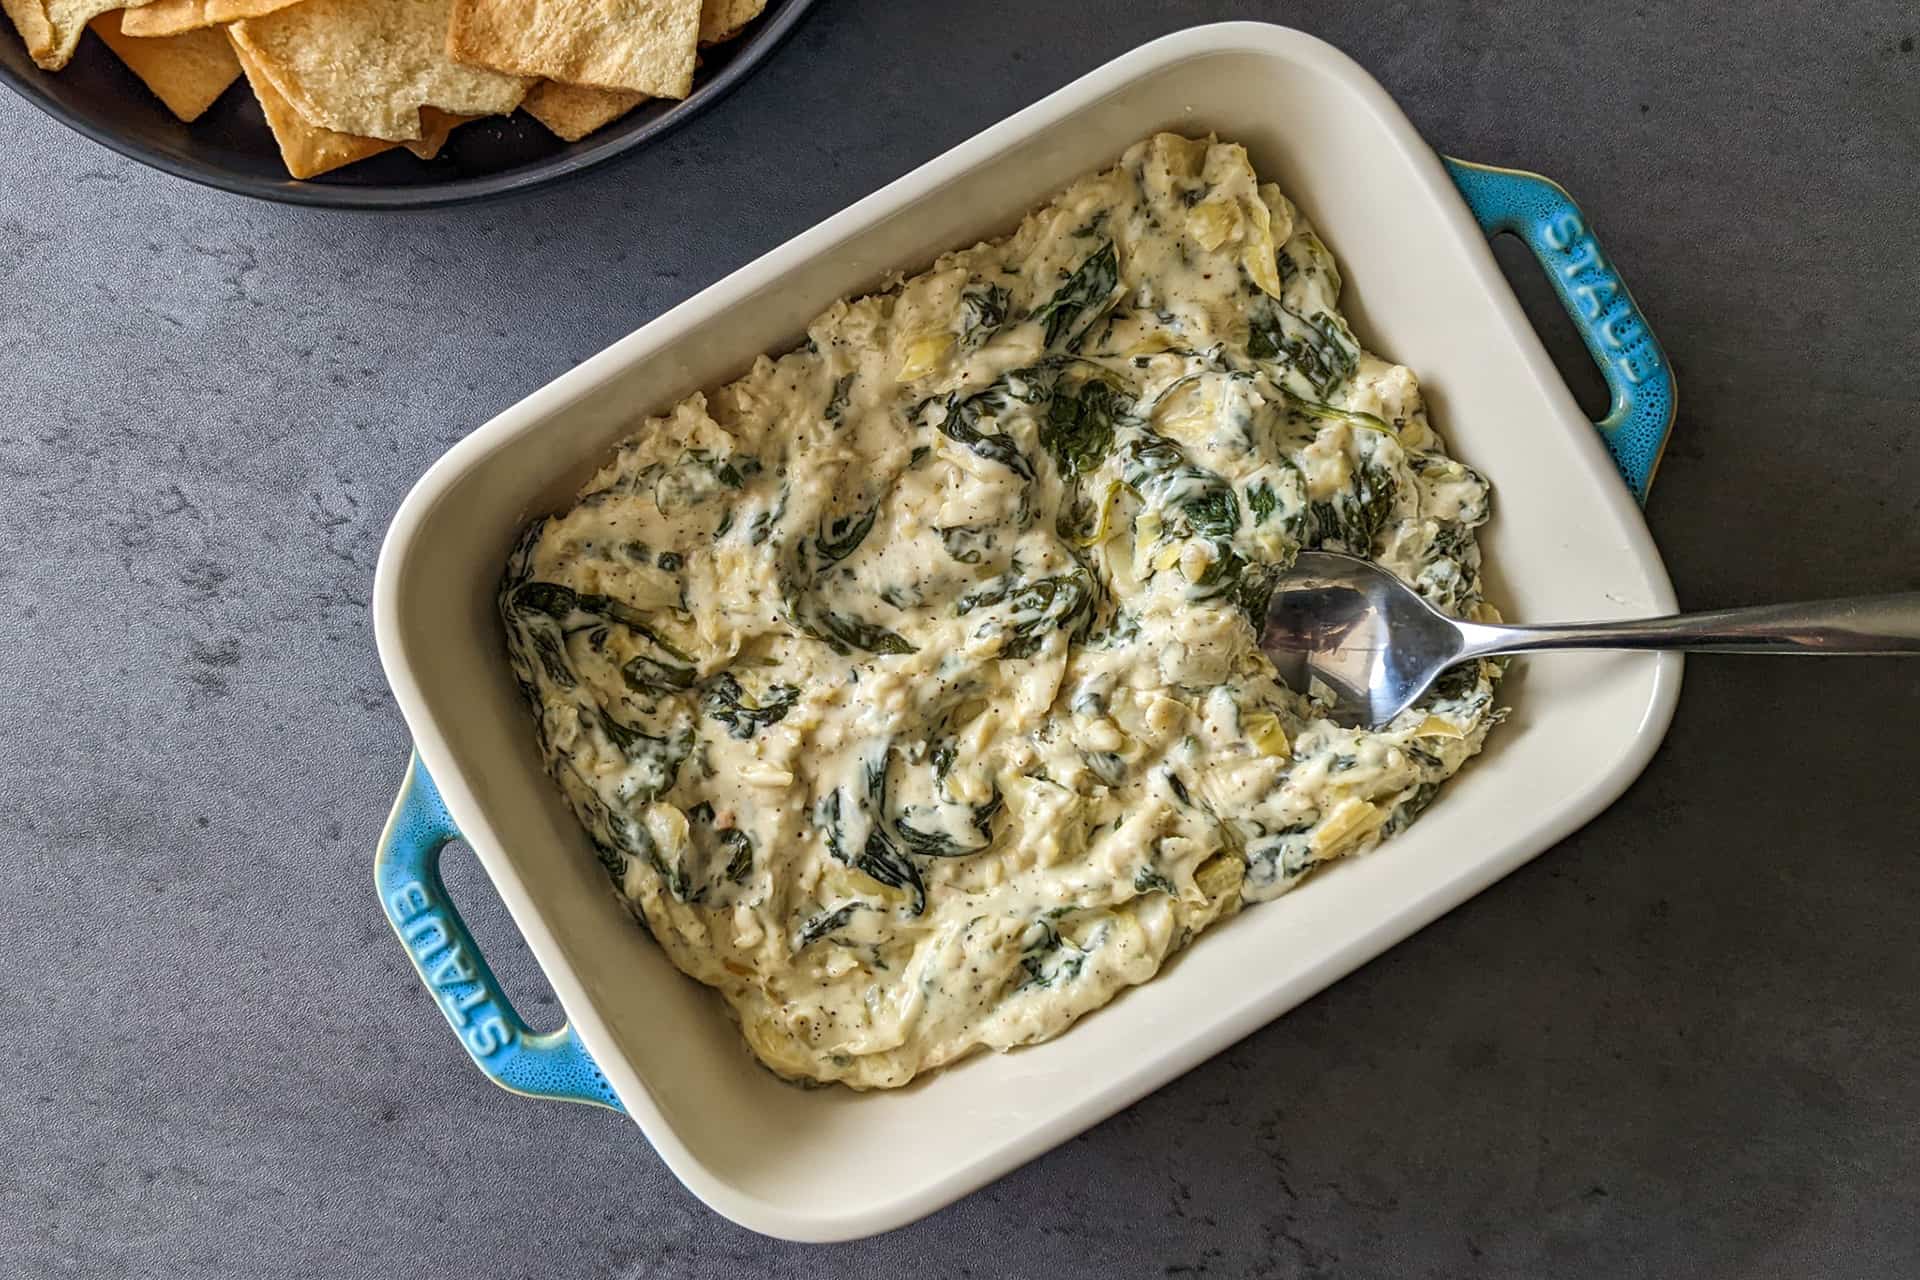 A casserole dish of cheesy spinach and artichoke dip with pita chips